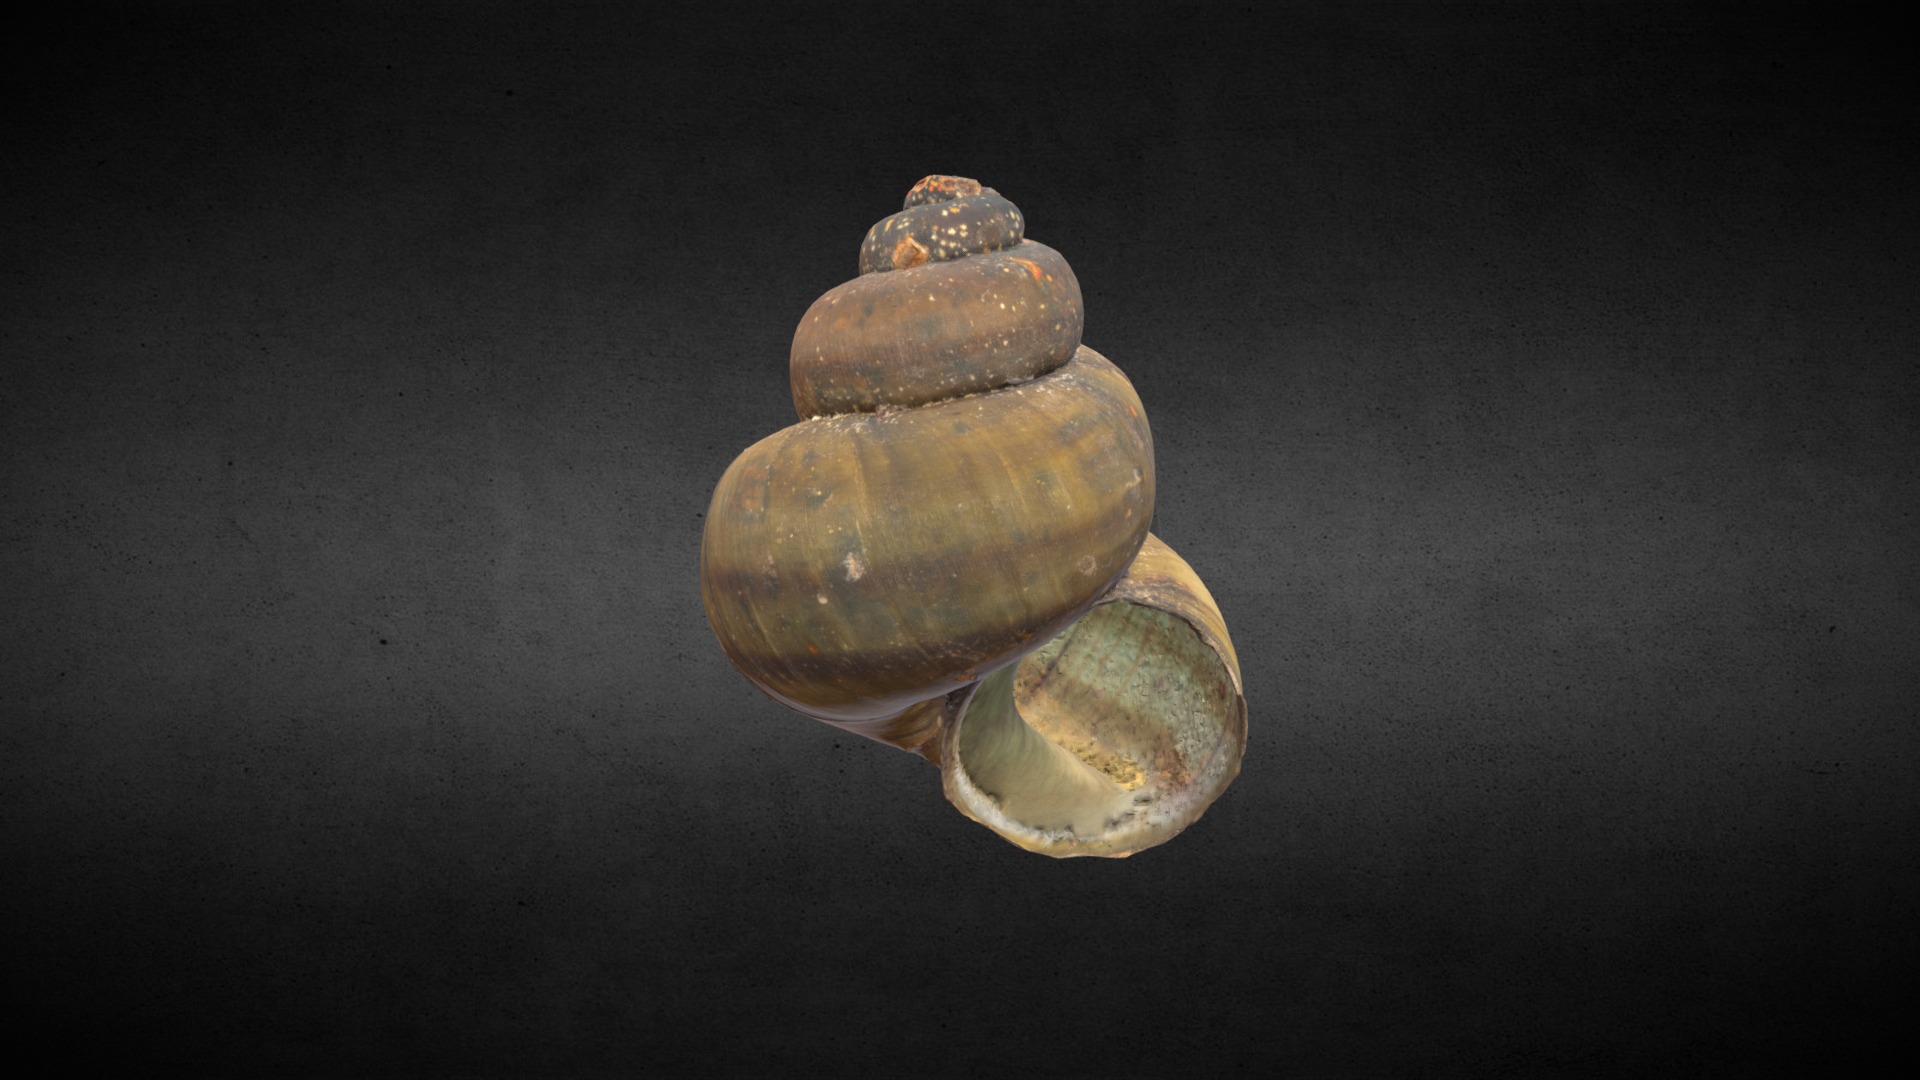 3D model Snail shell spetssumpsnäcka Viviparus contectus - This is a 3D model of the Snail shell spetssumpsnäcka Viviparus contectus. The 3D model is about a close-up of some shells.